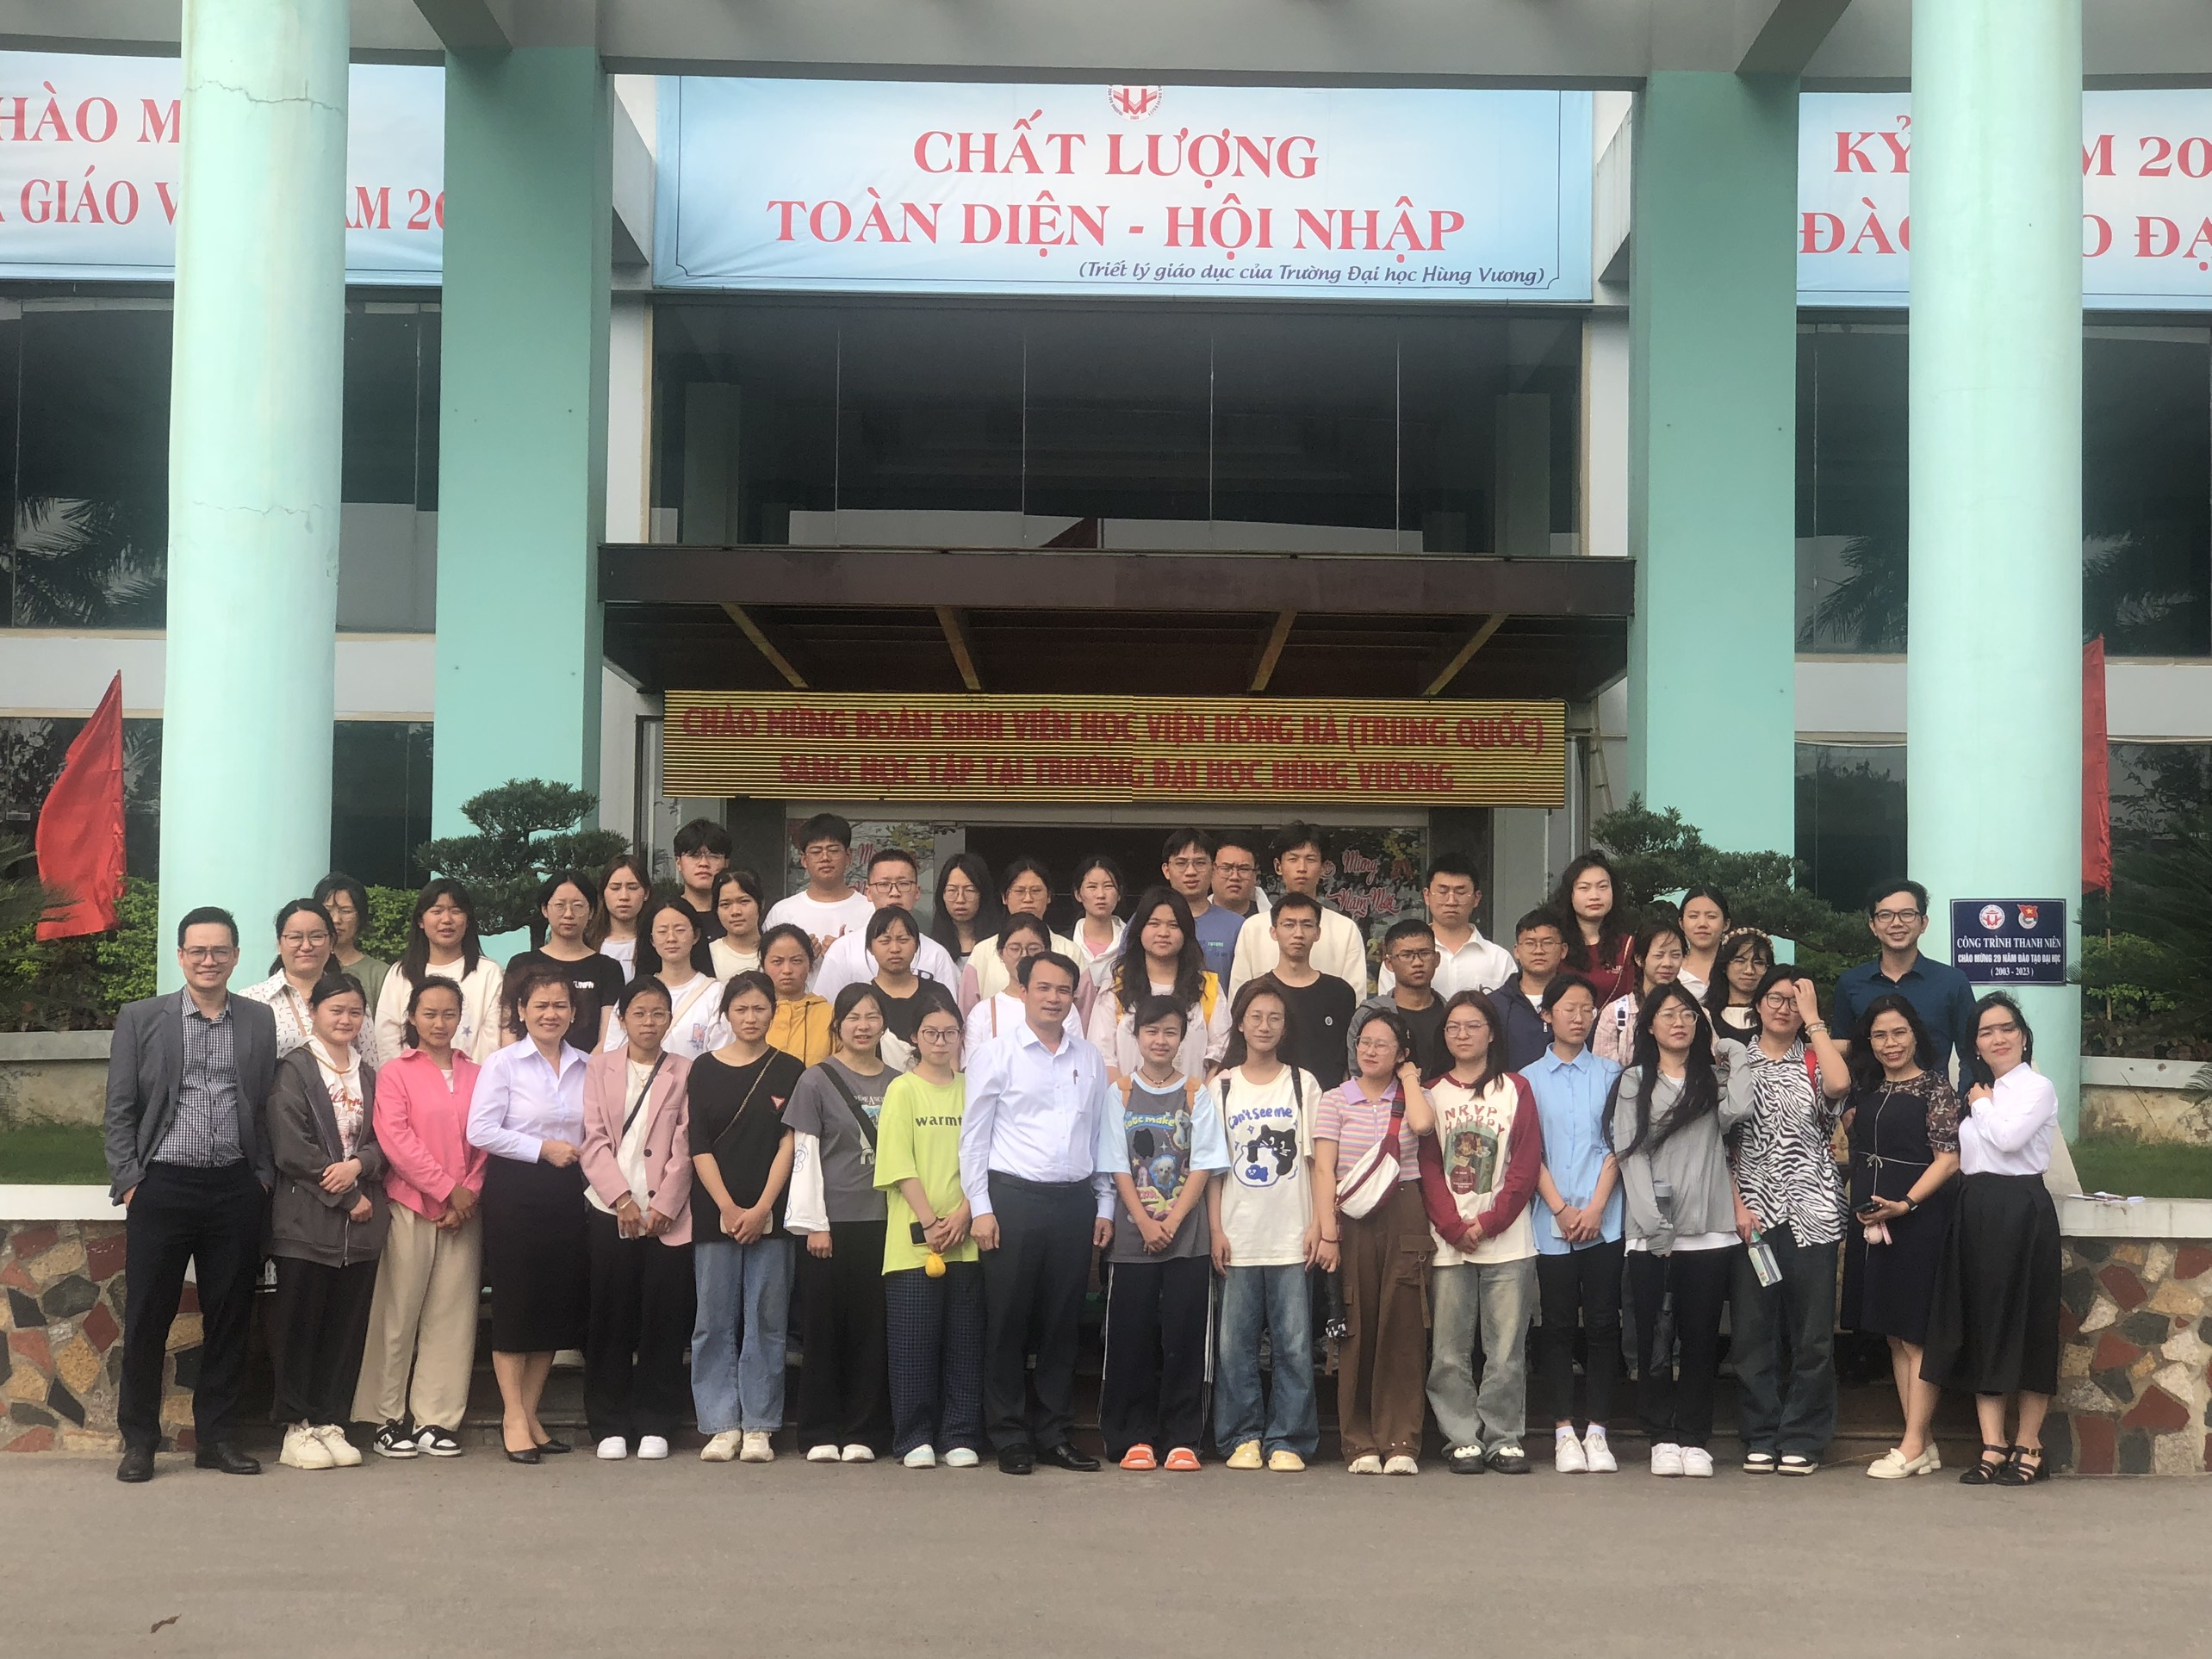 Welcome 40 students from Honghe University to study Vietnamese at Hung Vuong University